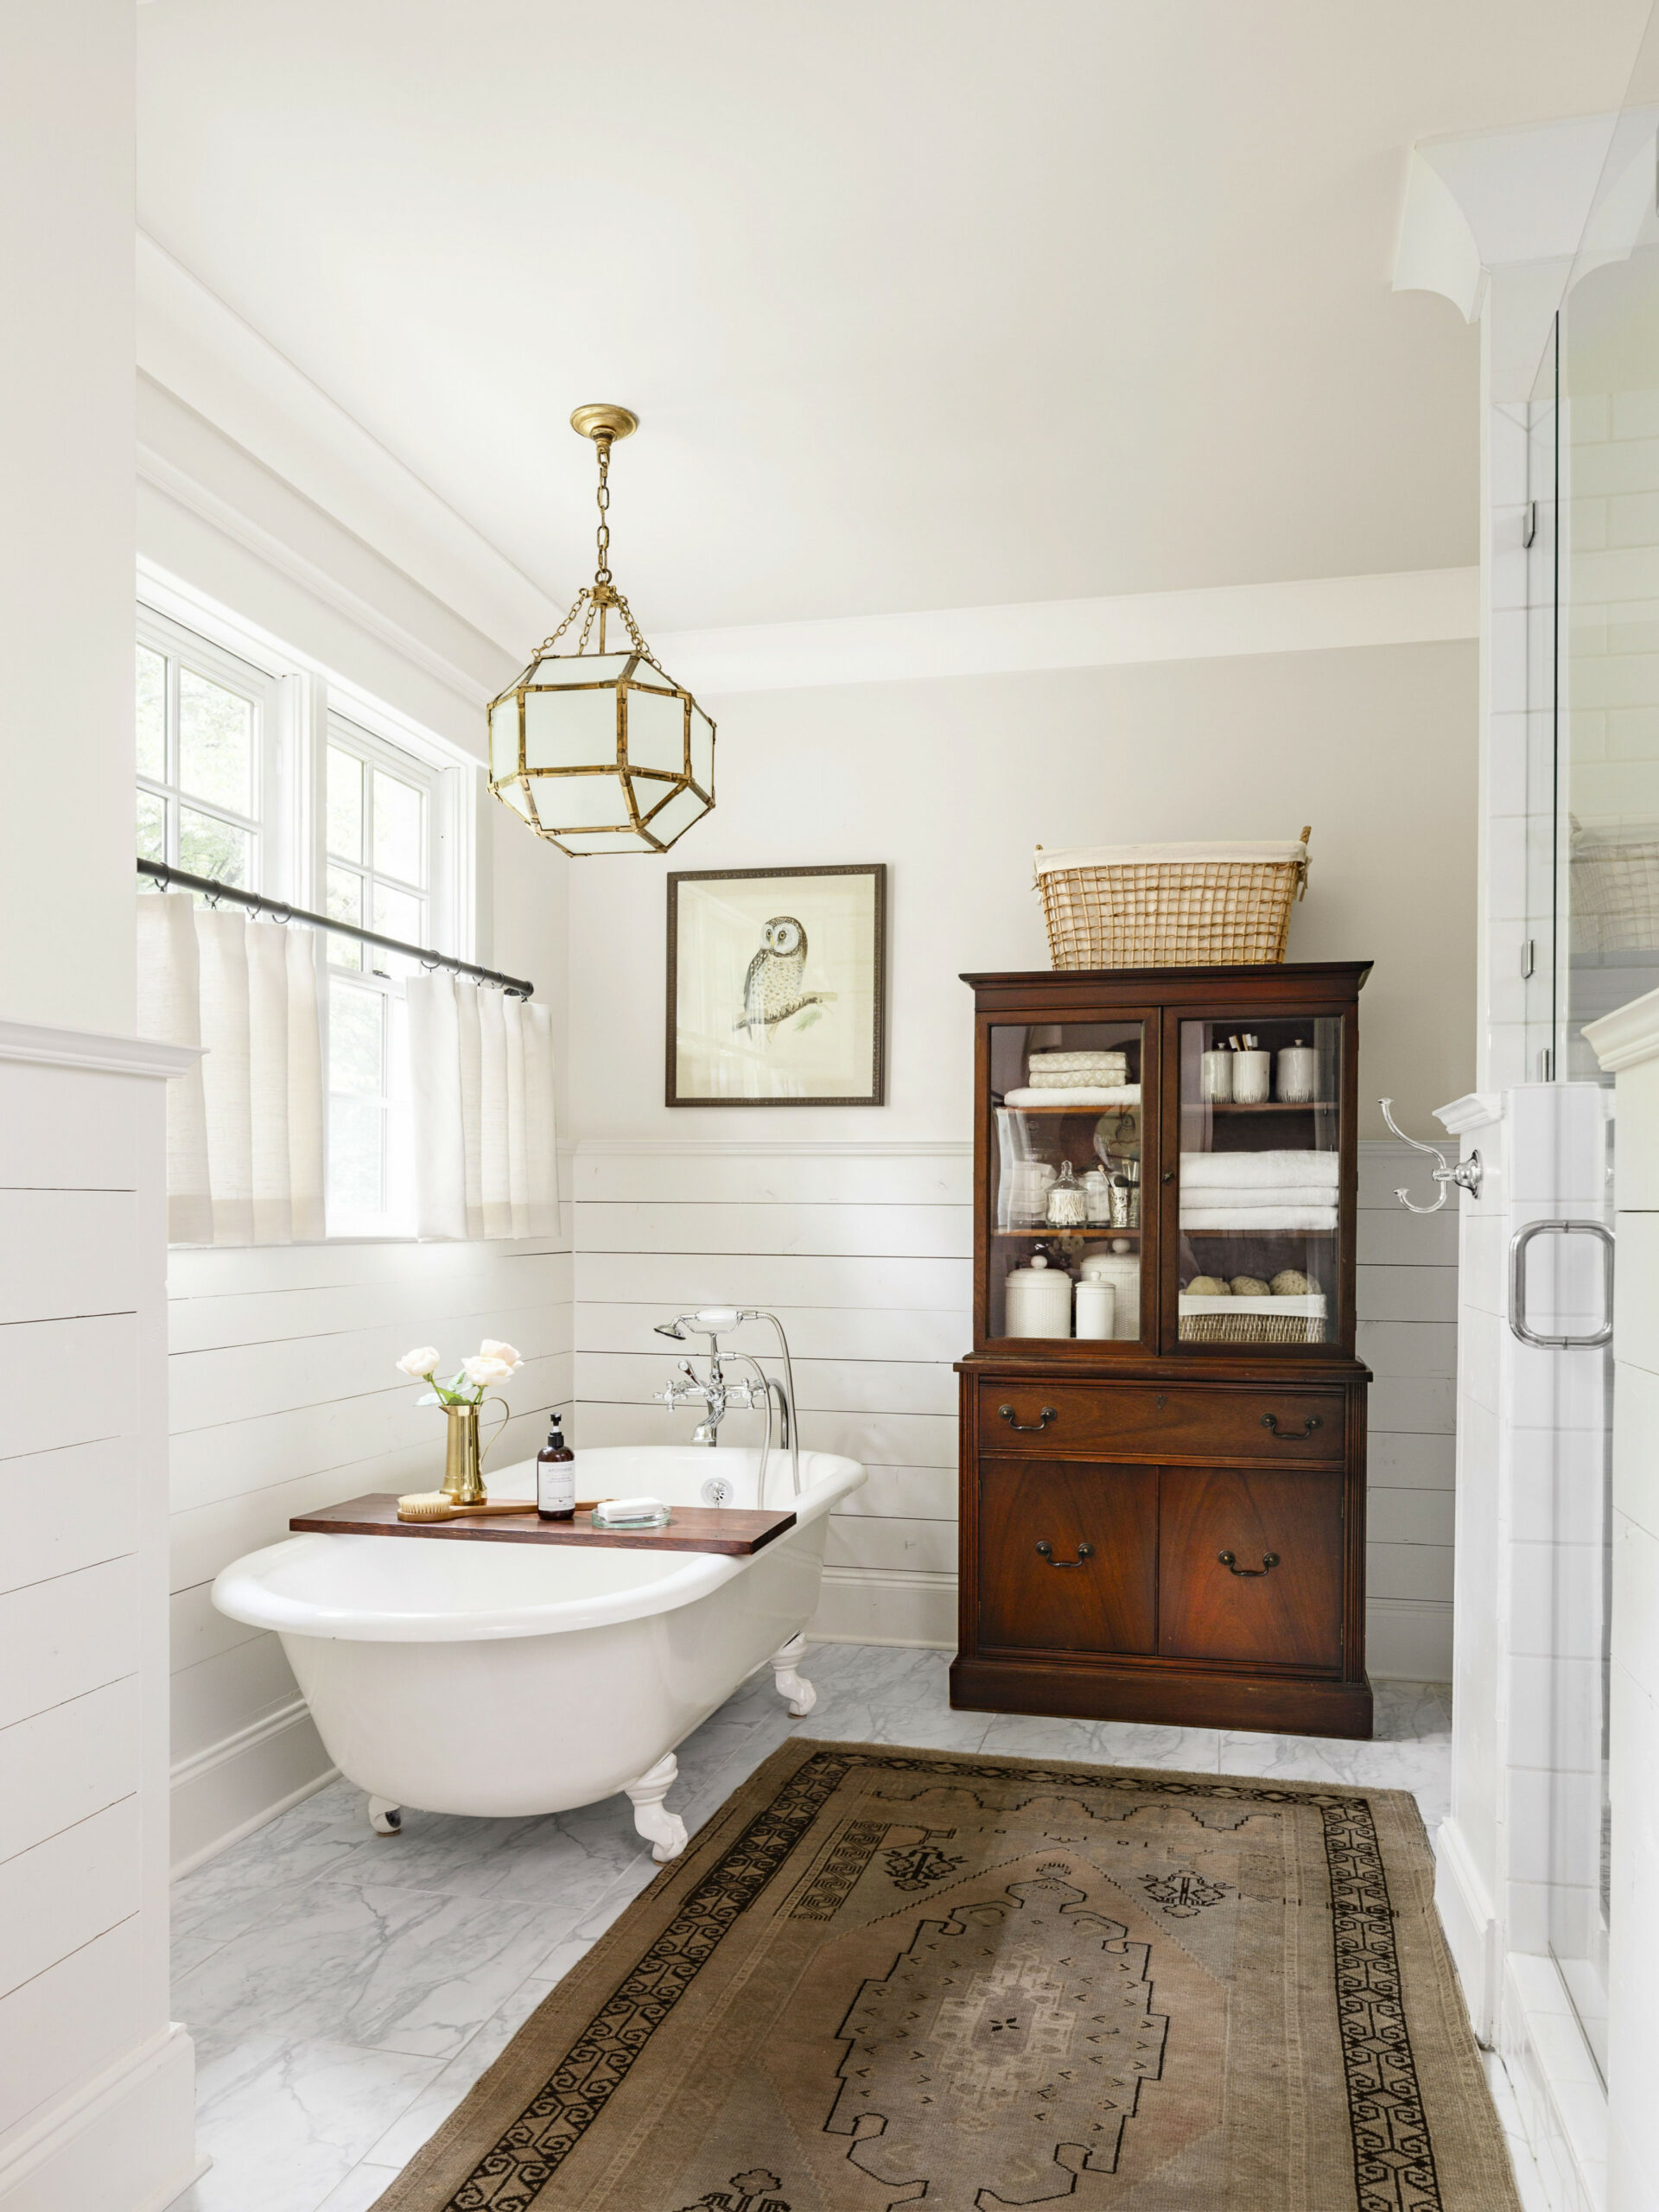 Best Clawfoot Tub Ideas for Your Bathroom - Decorating with